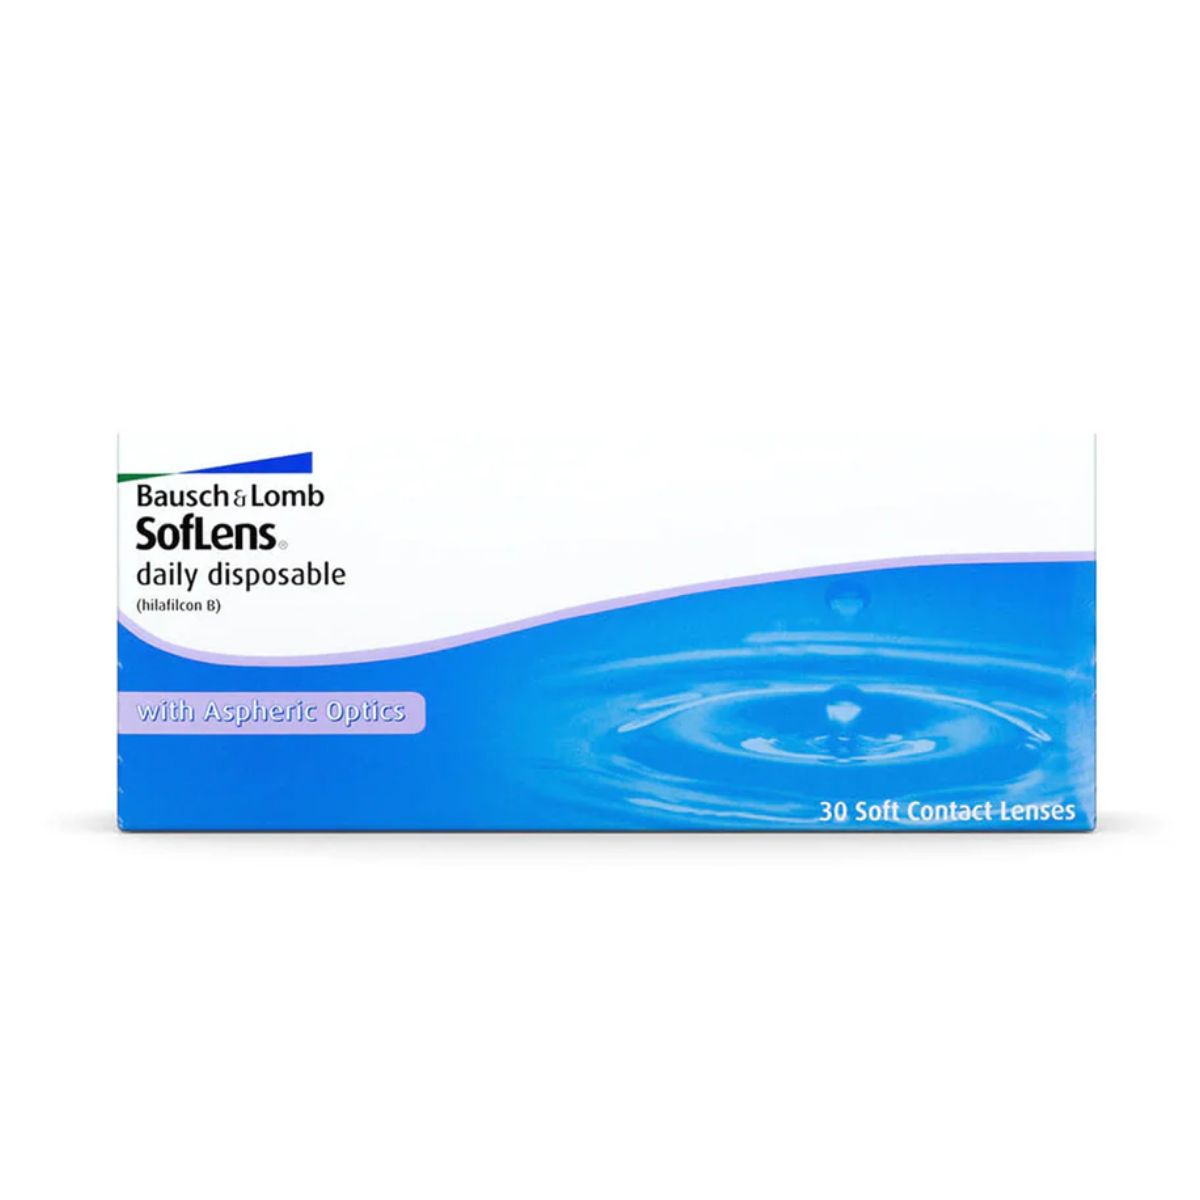 "Bausch & Lomb Soflens Daily Disposable Contact Lenses | Optorium"